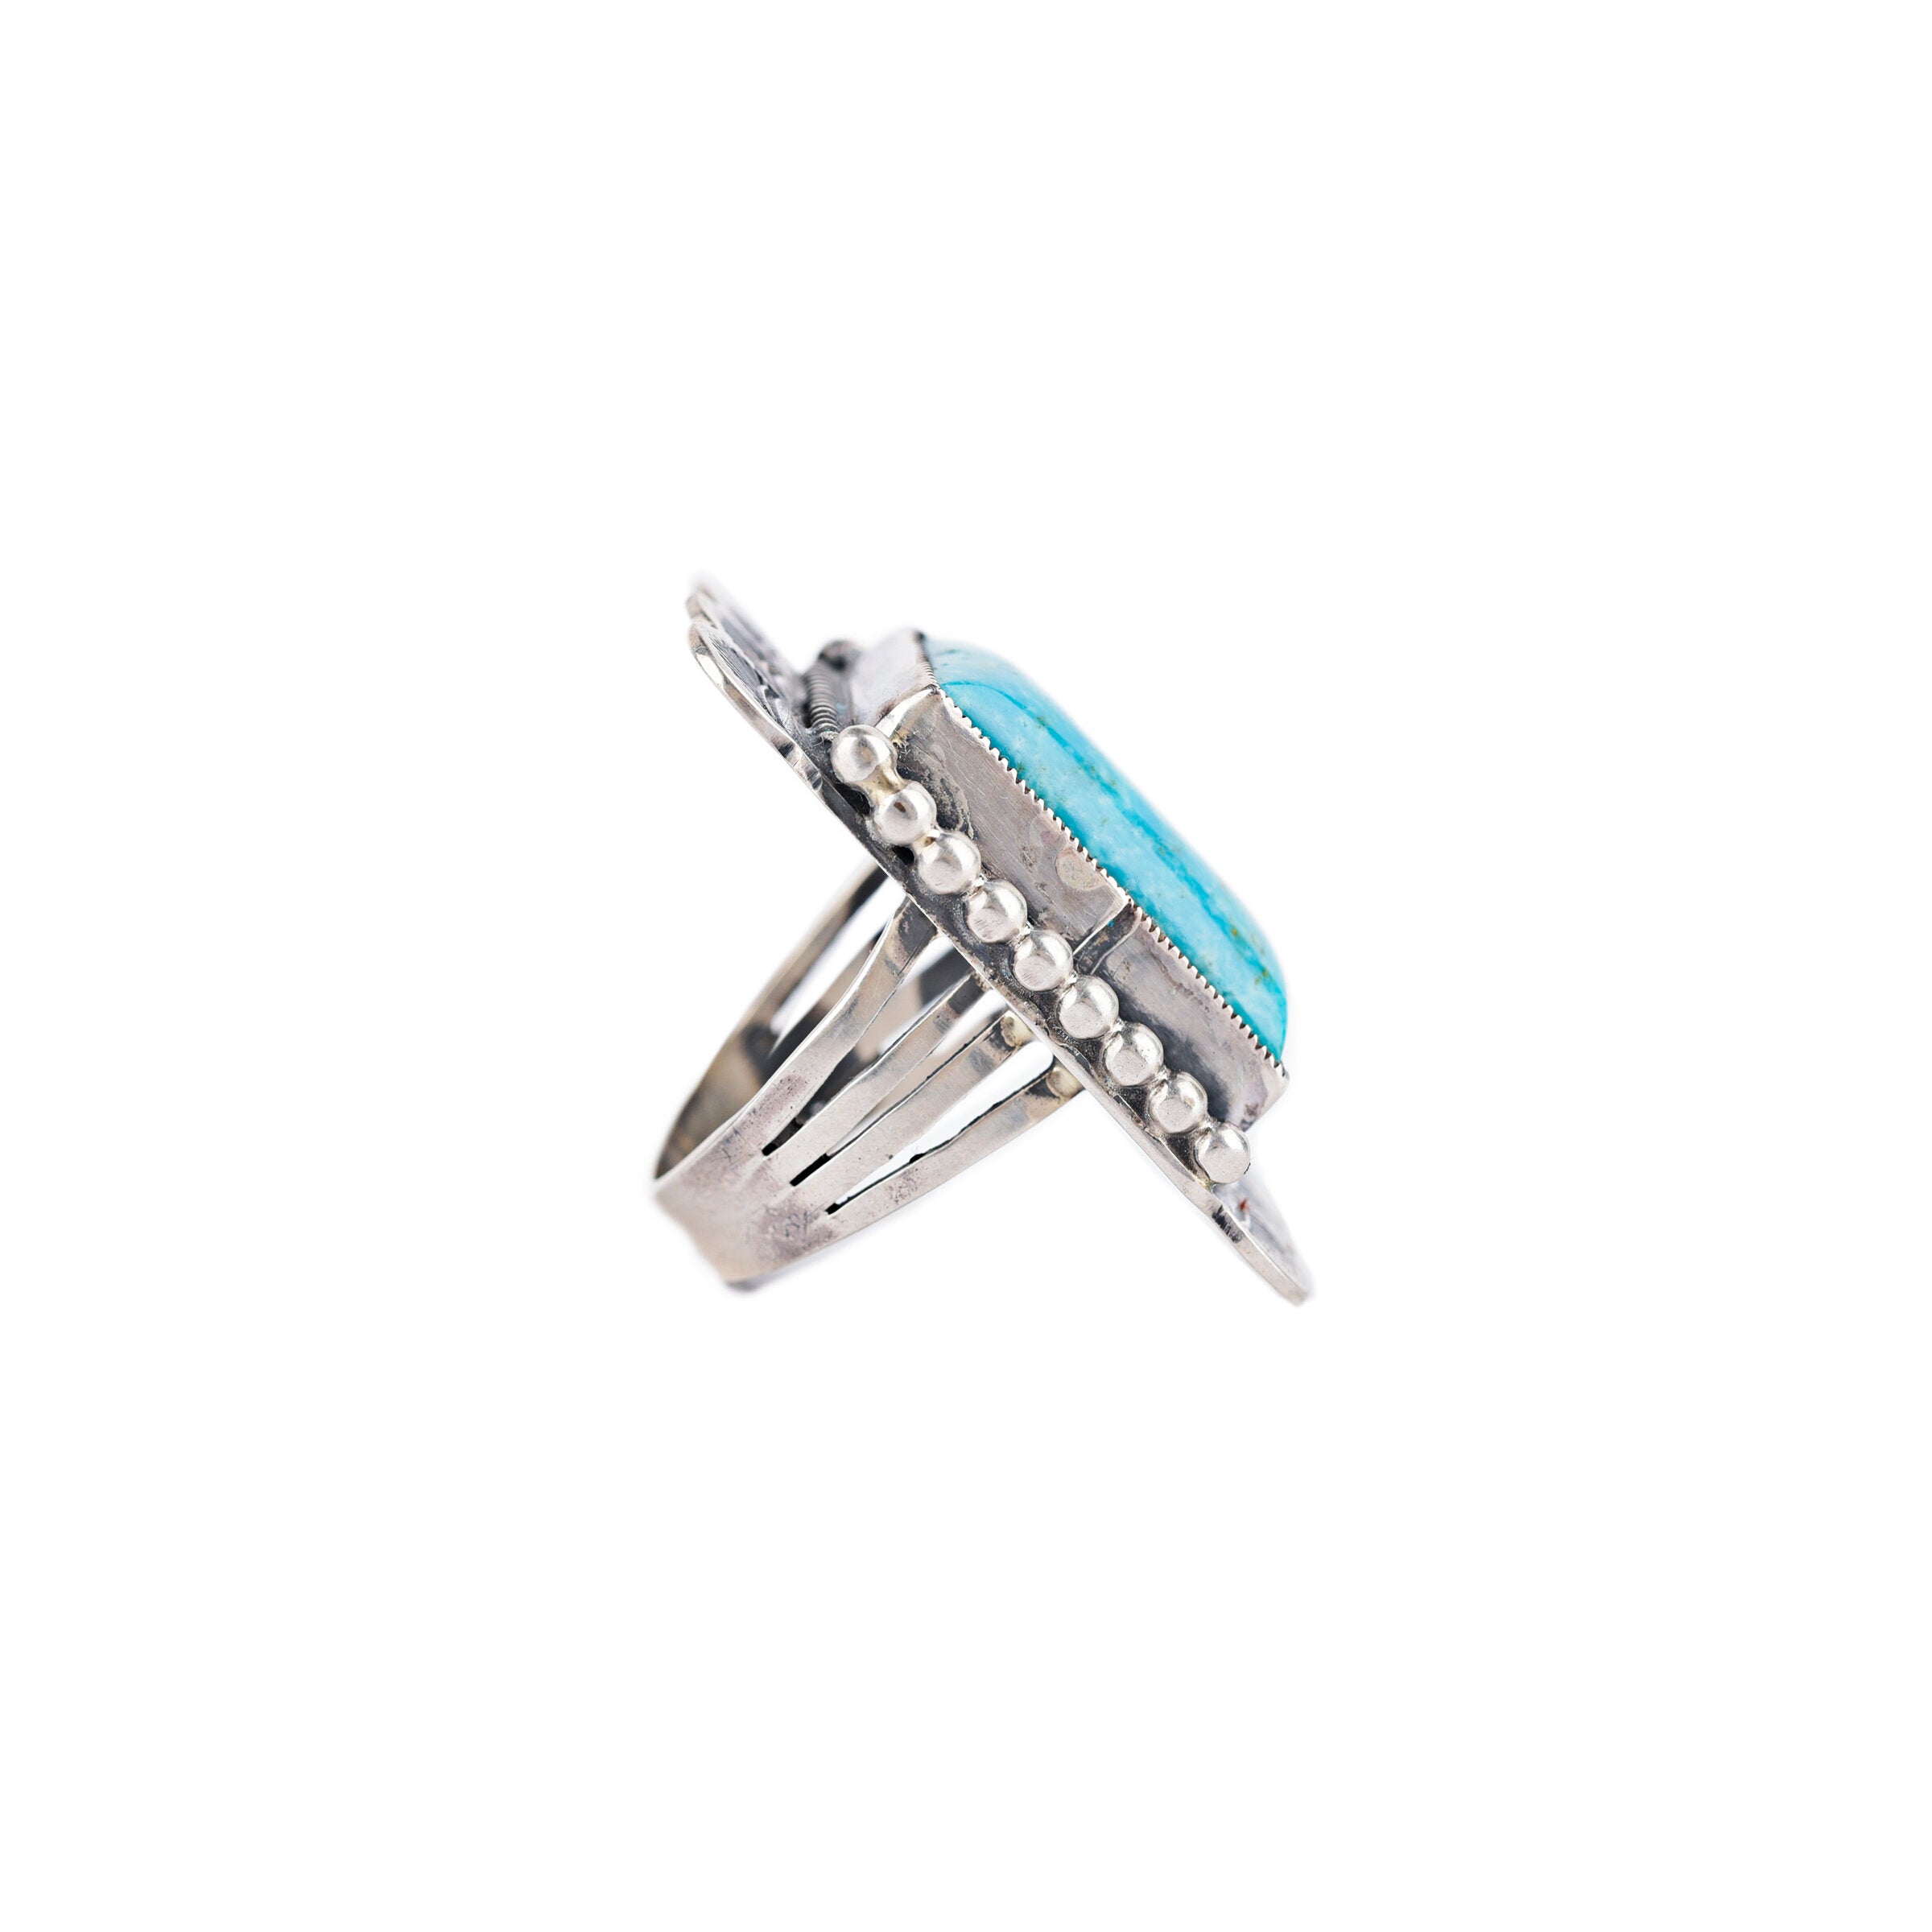 Leo Feeney Stamped Turquoise Ring - Size 6 1/2